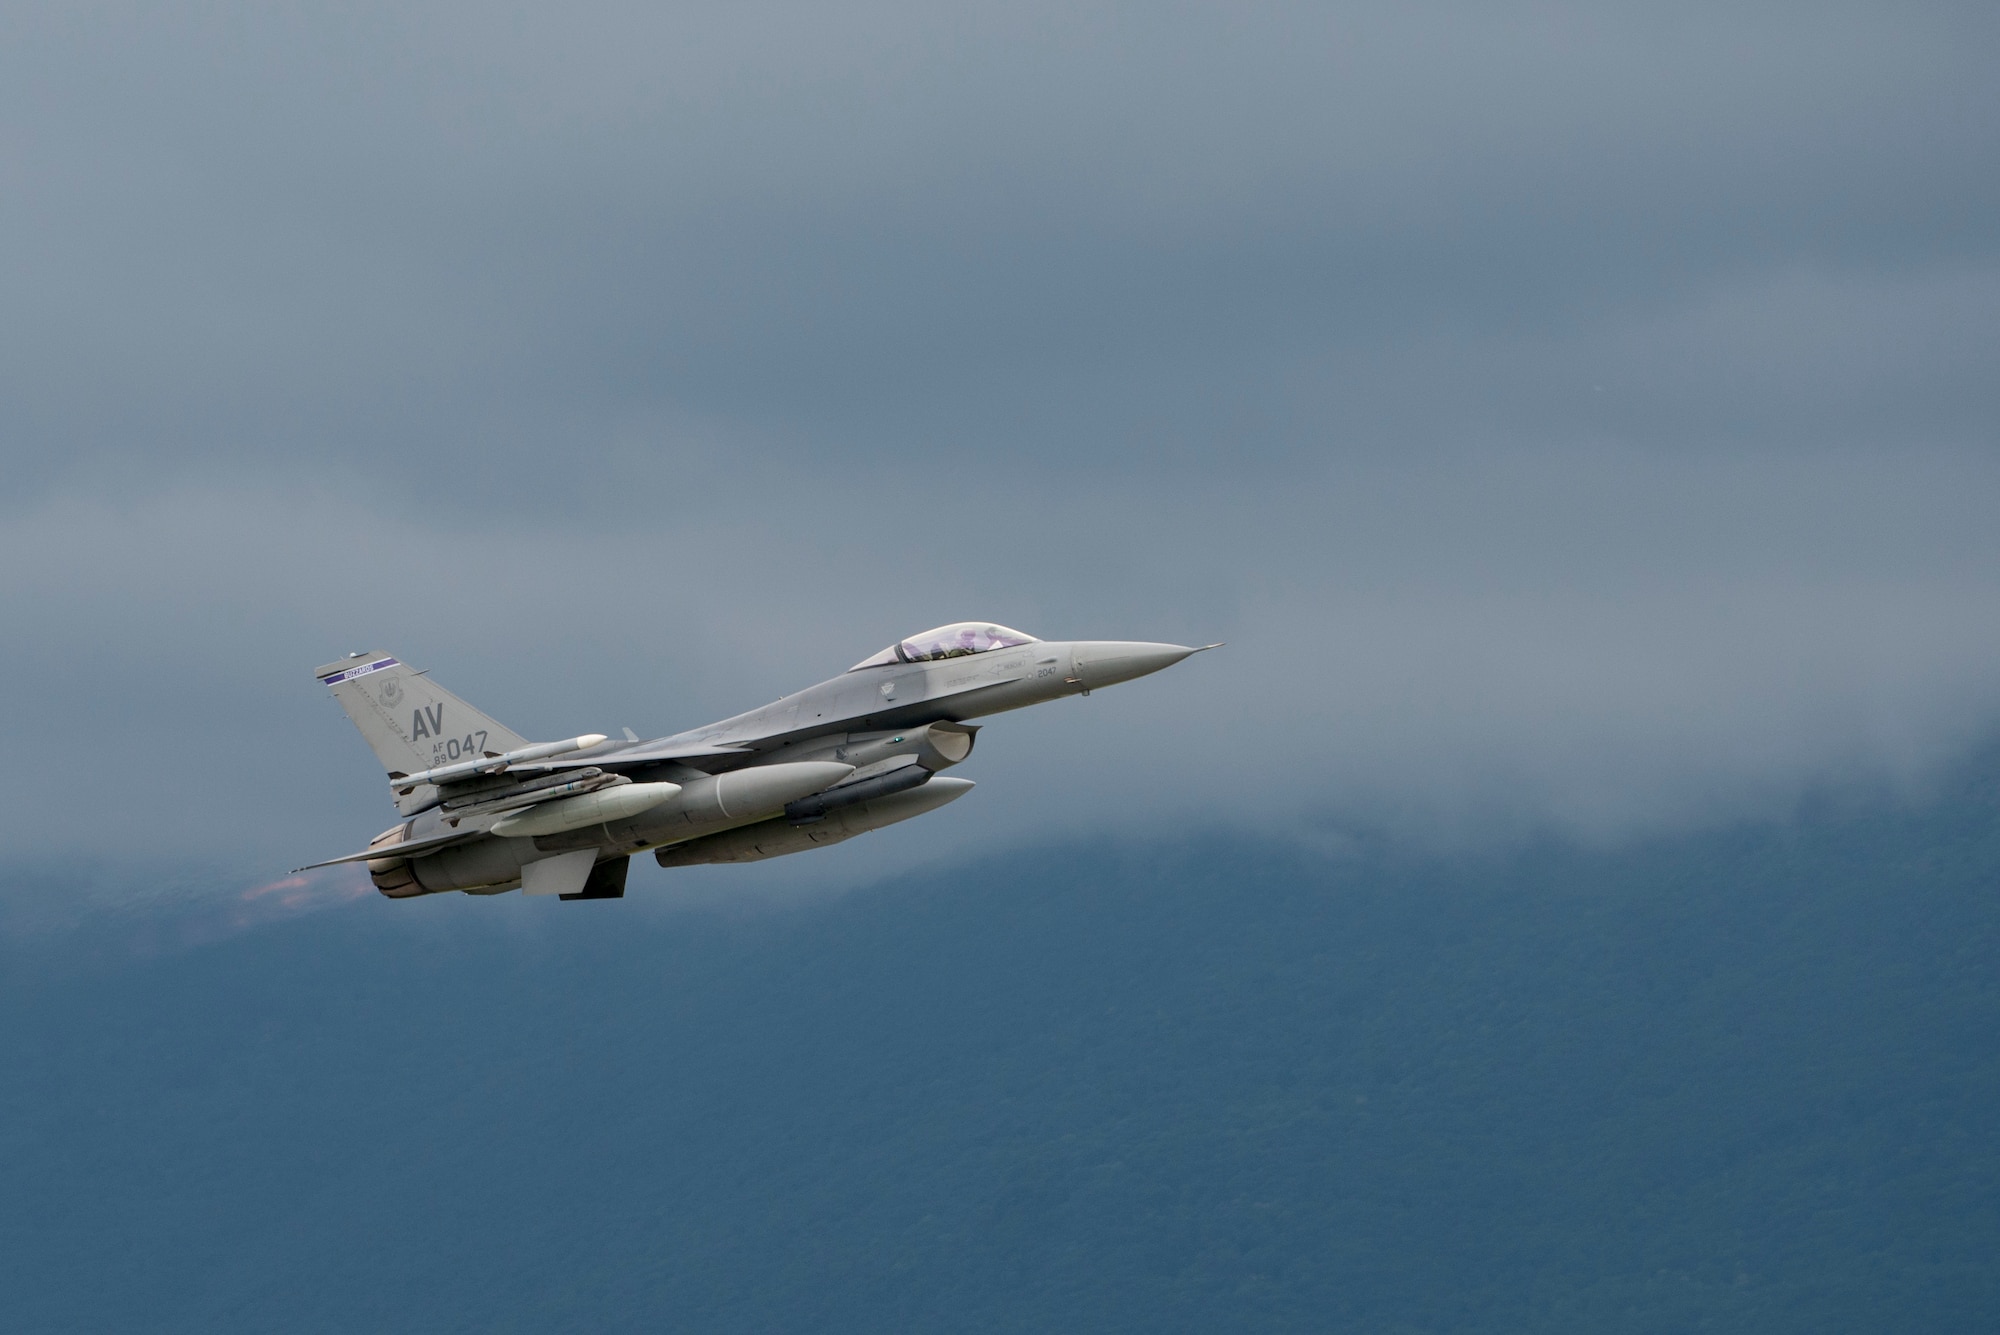 A 510th Fighter Squadron F-16 Fighting Falcon departs from the 31st Fighter Wing, Aviano Air Base, Italy, for Lask Air Base, Poland, June 1, 2016, to participate in Aviation Detachment 16-3, a rotation of quarterly flying missions in support of Operation Atlantic Resolve. During this deployment 14 F-16 Fighting Falcons from the 31st FW, Aviano Air Base, Italy, six F-16s from the 138 FW, Tulsa Air National Guard, Okla., and support personnel will conduct bilateral training with Poland air forces to bolster interoperability between nations. (U.S. Air Force photo/Senior Airman Krystal Ardrey)